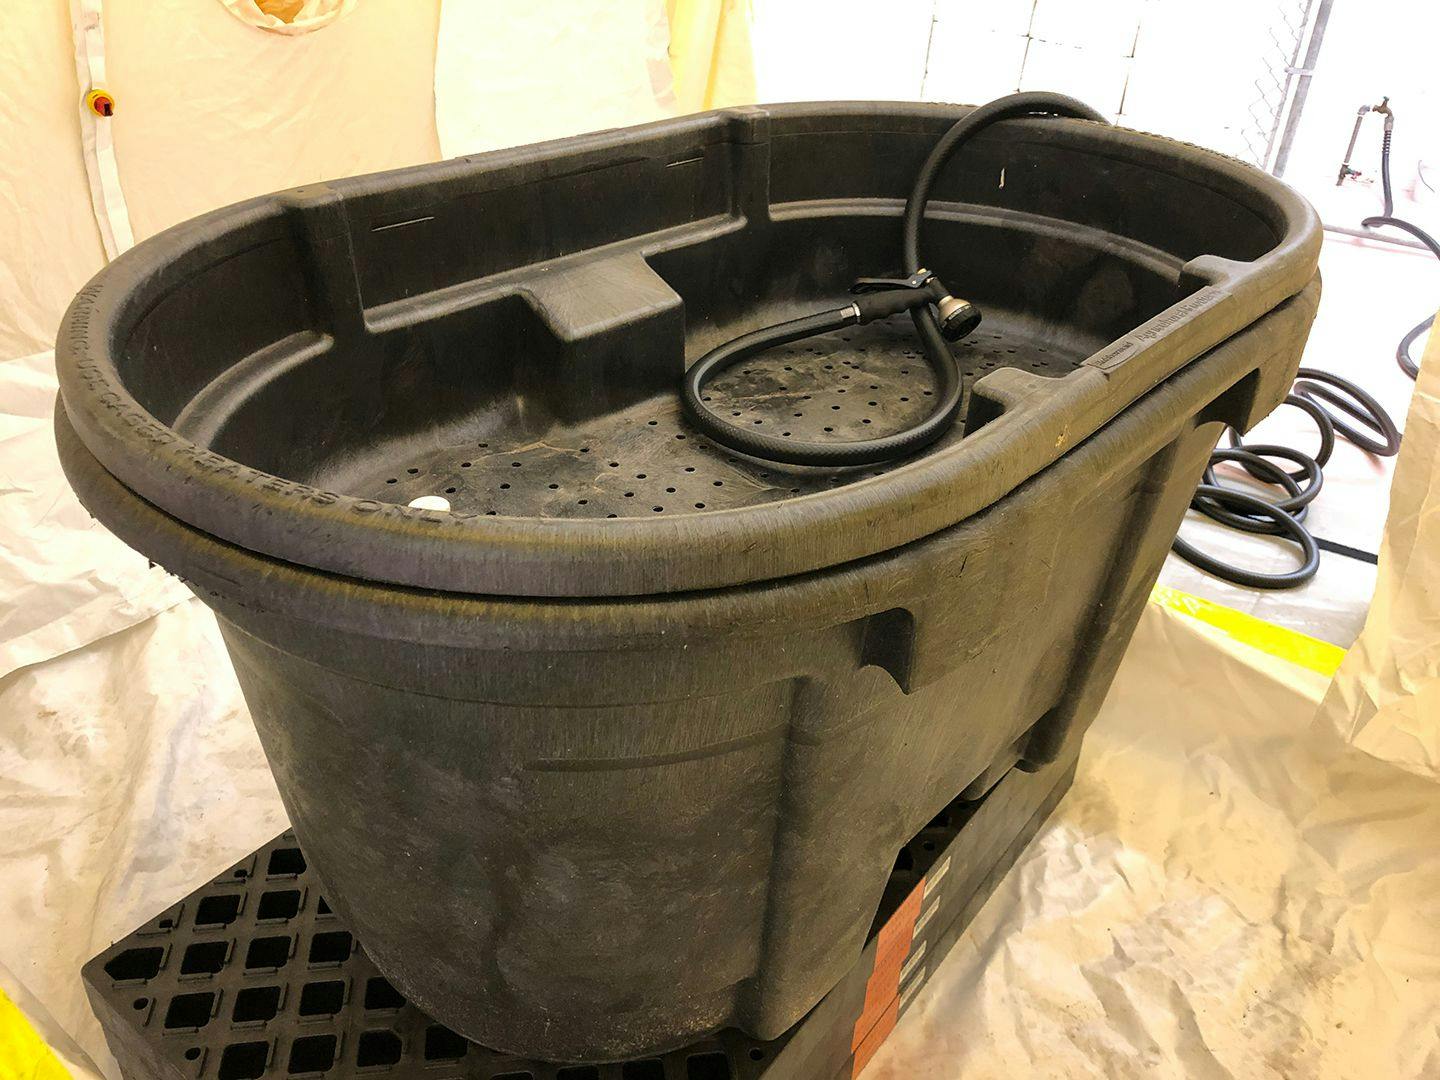 Example of a decontamination bathing tub (Image courtesy of The Texas A&M School of Veterinary Medicine & Biomedical Sciences’ Veterinary Emergency Team)